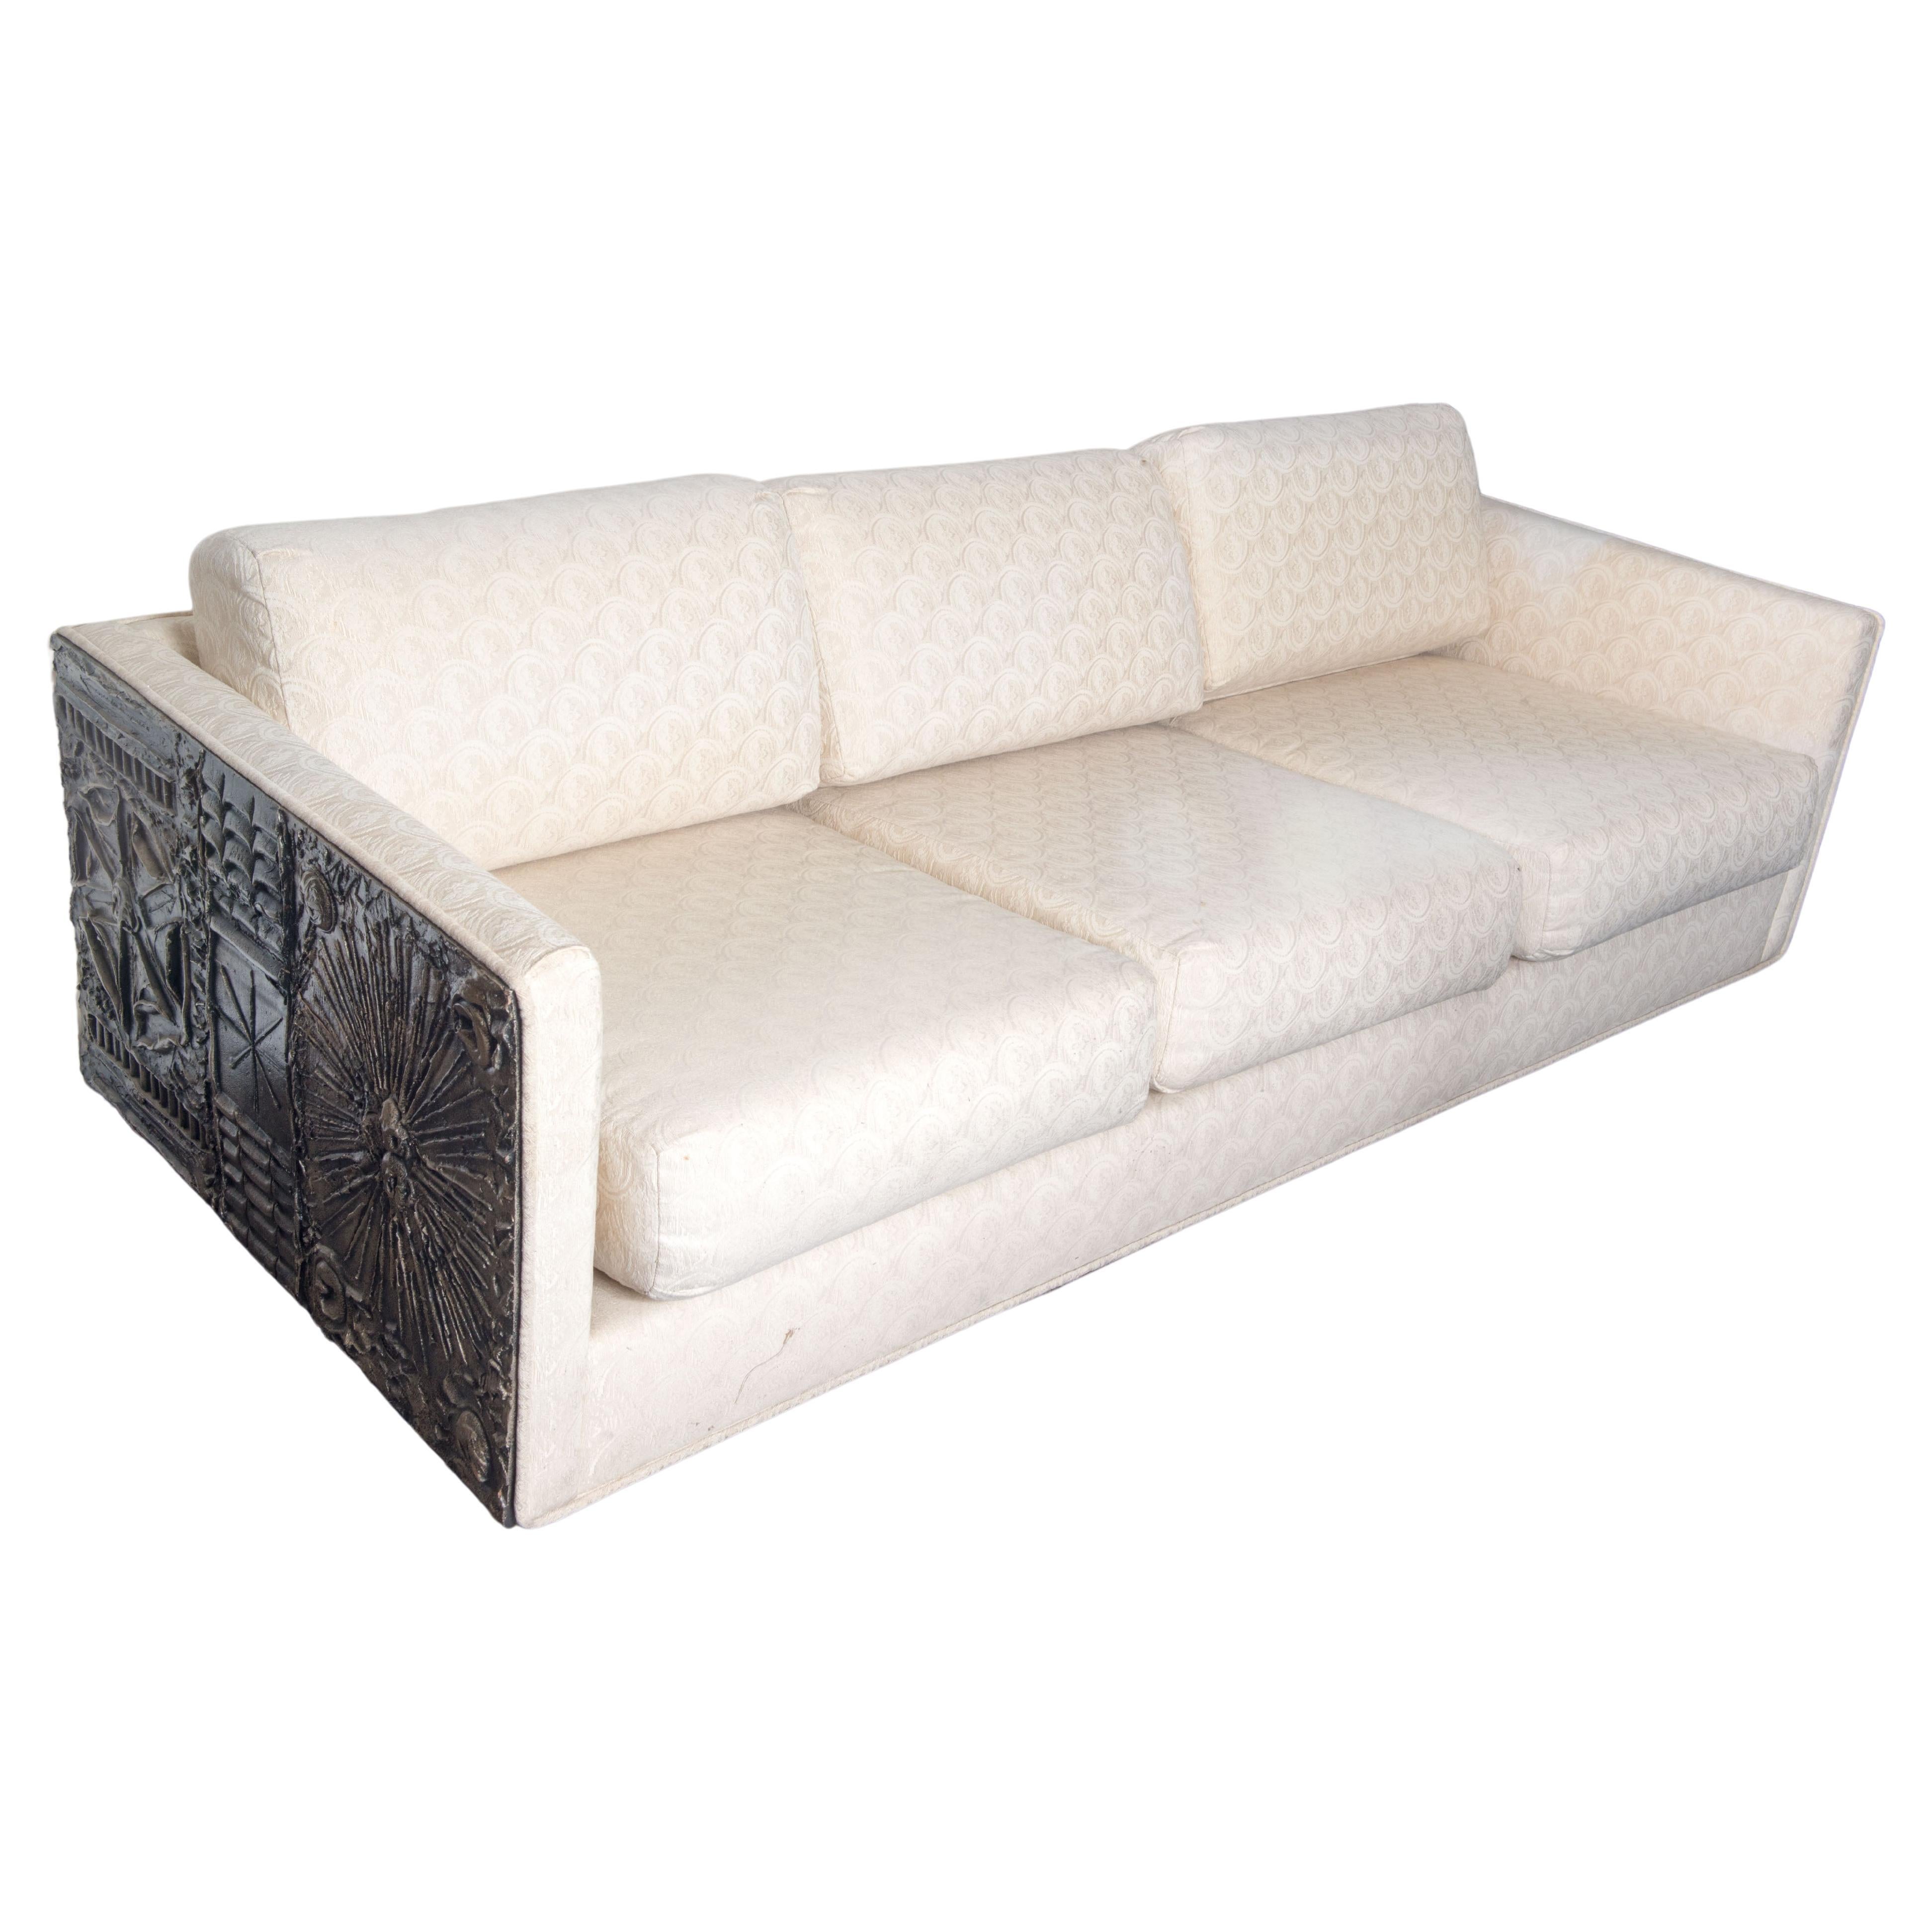 Adrian Pearsall Brutalist Style Sofa For Sale